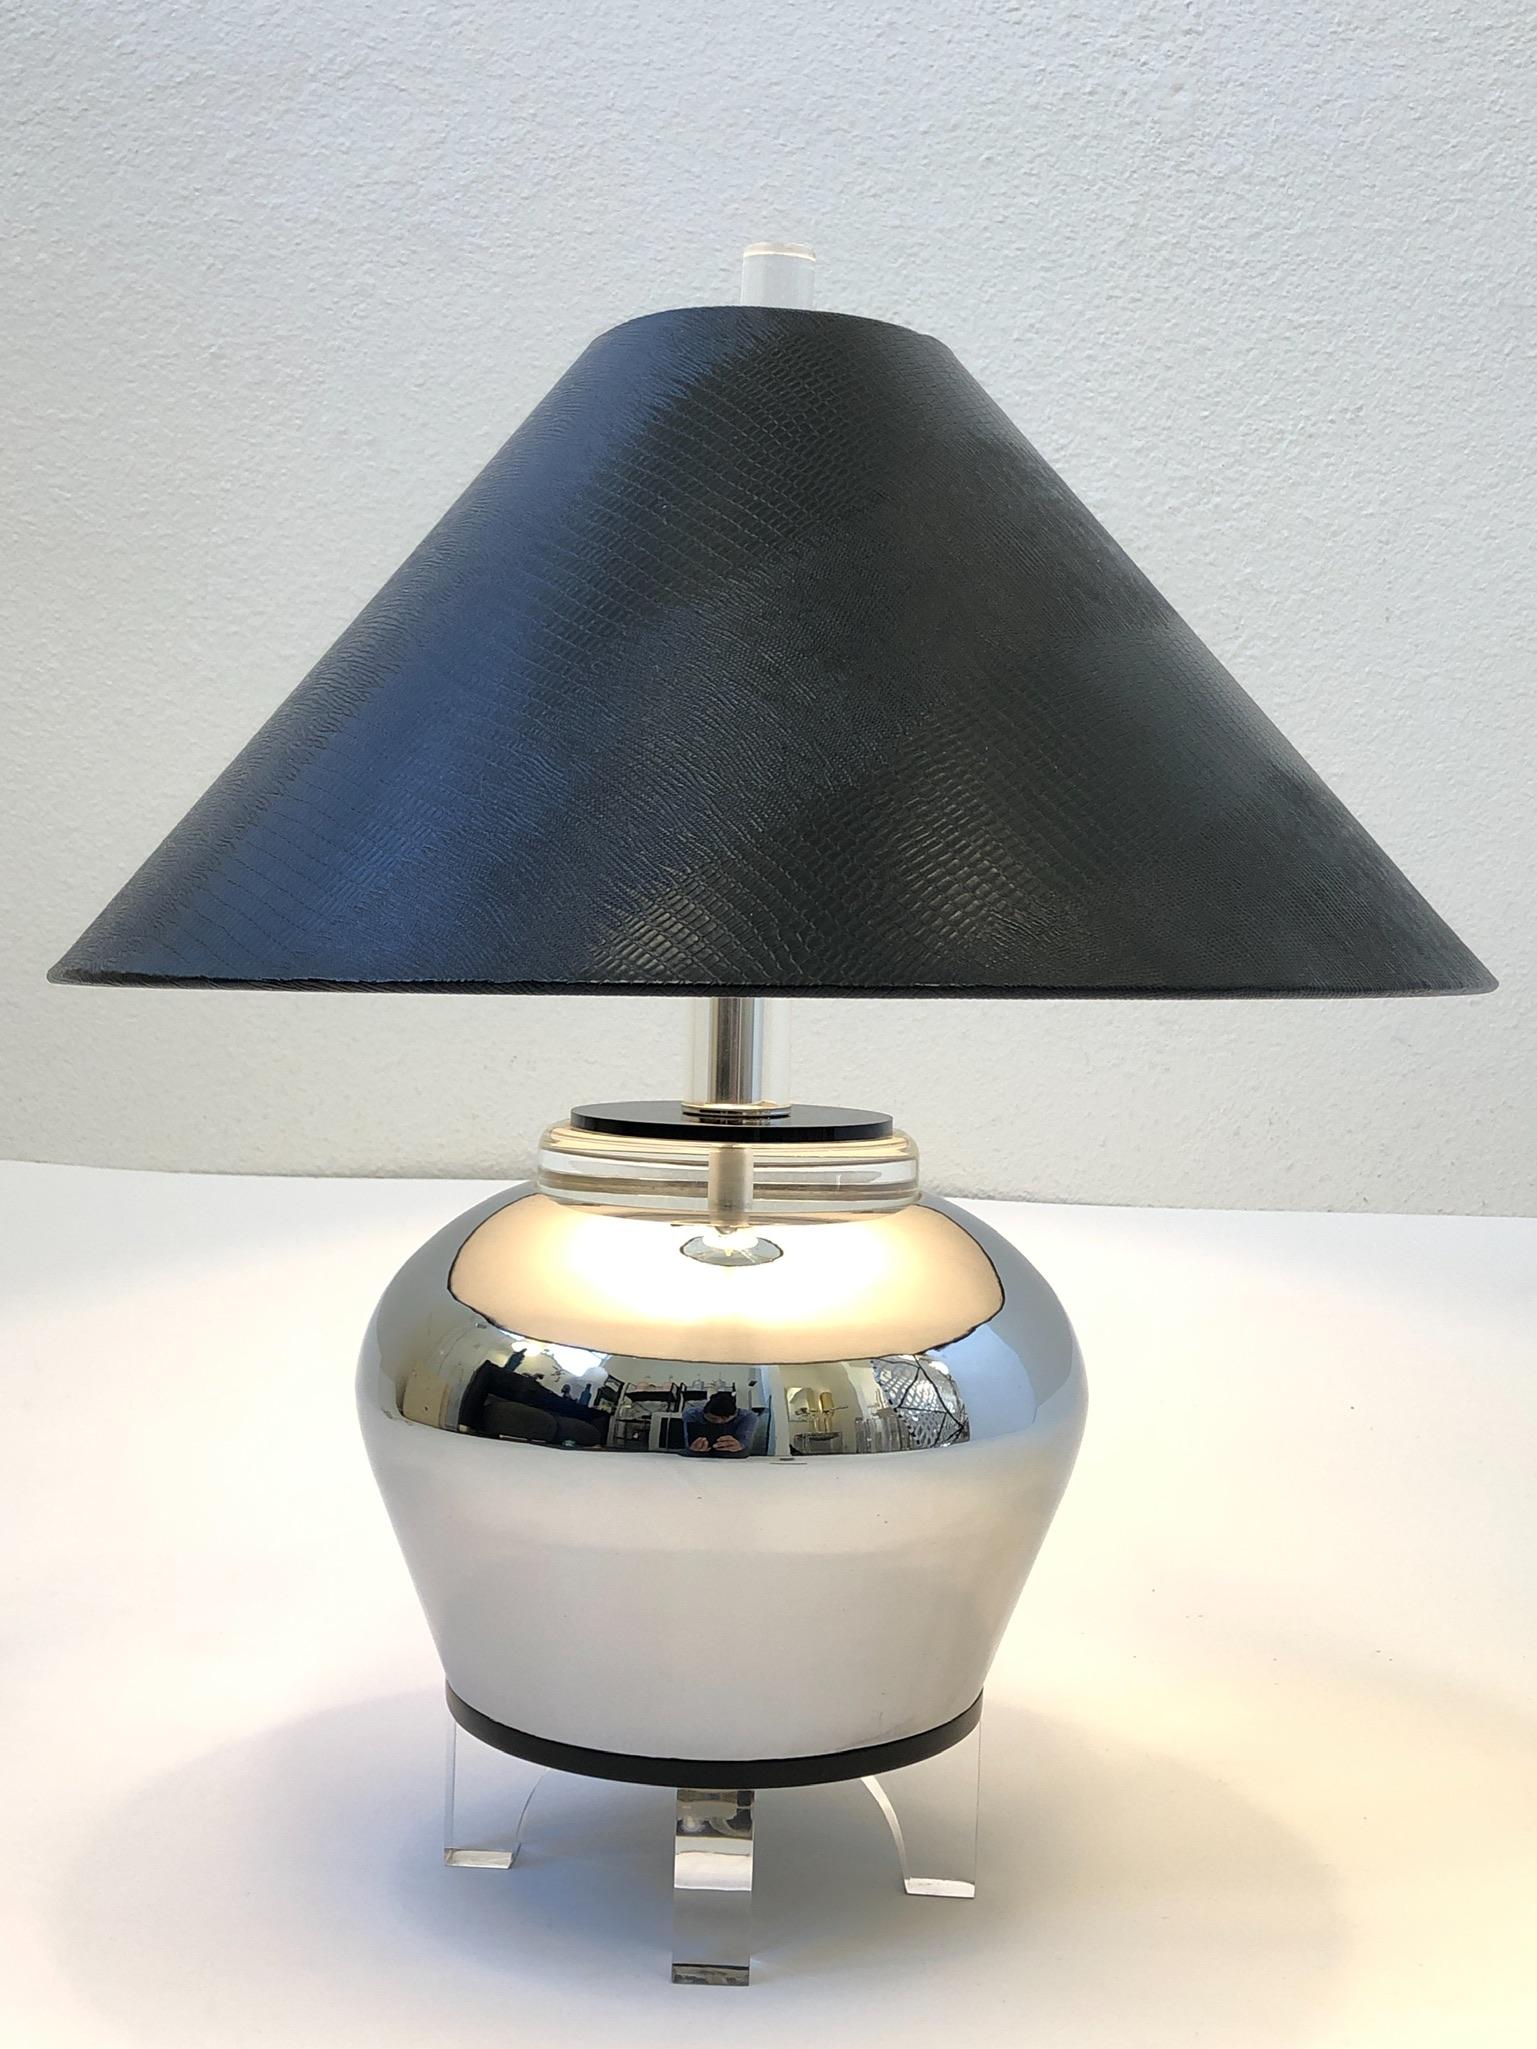 1980s polish chrome urn shape table lamp with clear and black Lucite details.
Original black faux lizard embossed lamp shade.
Overall dimensions: 21” high 19” diameter with shade.